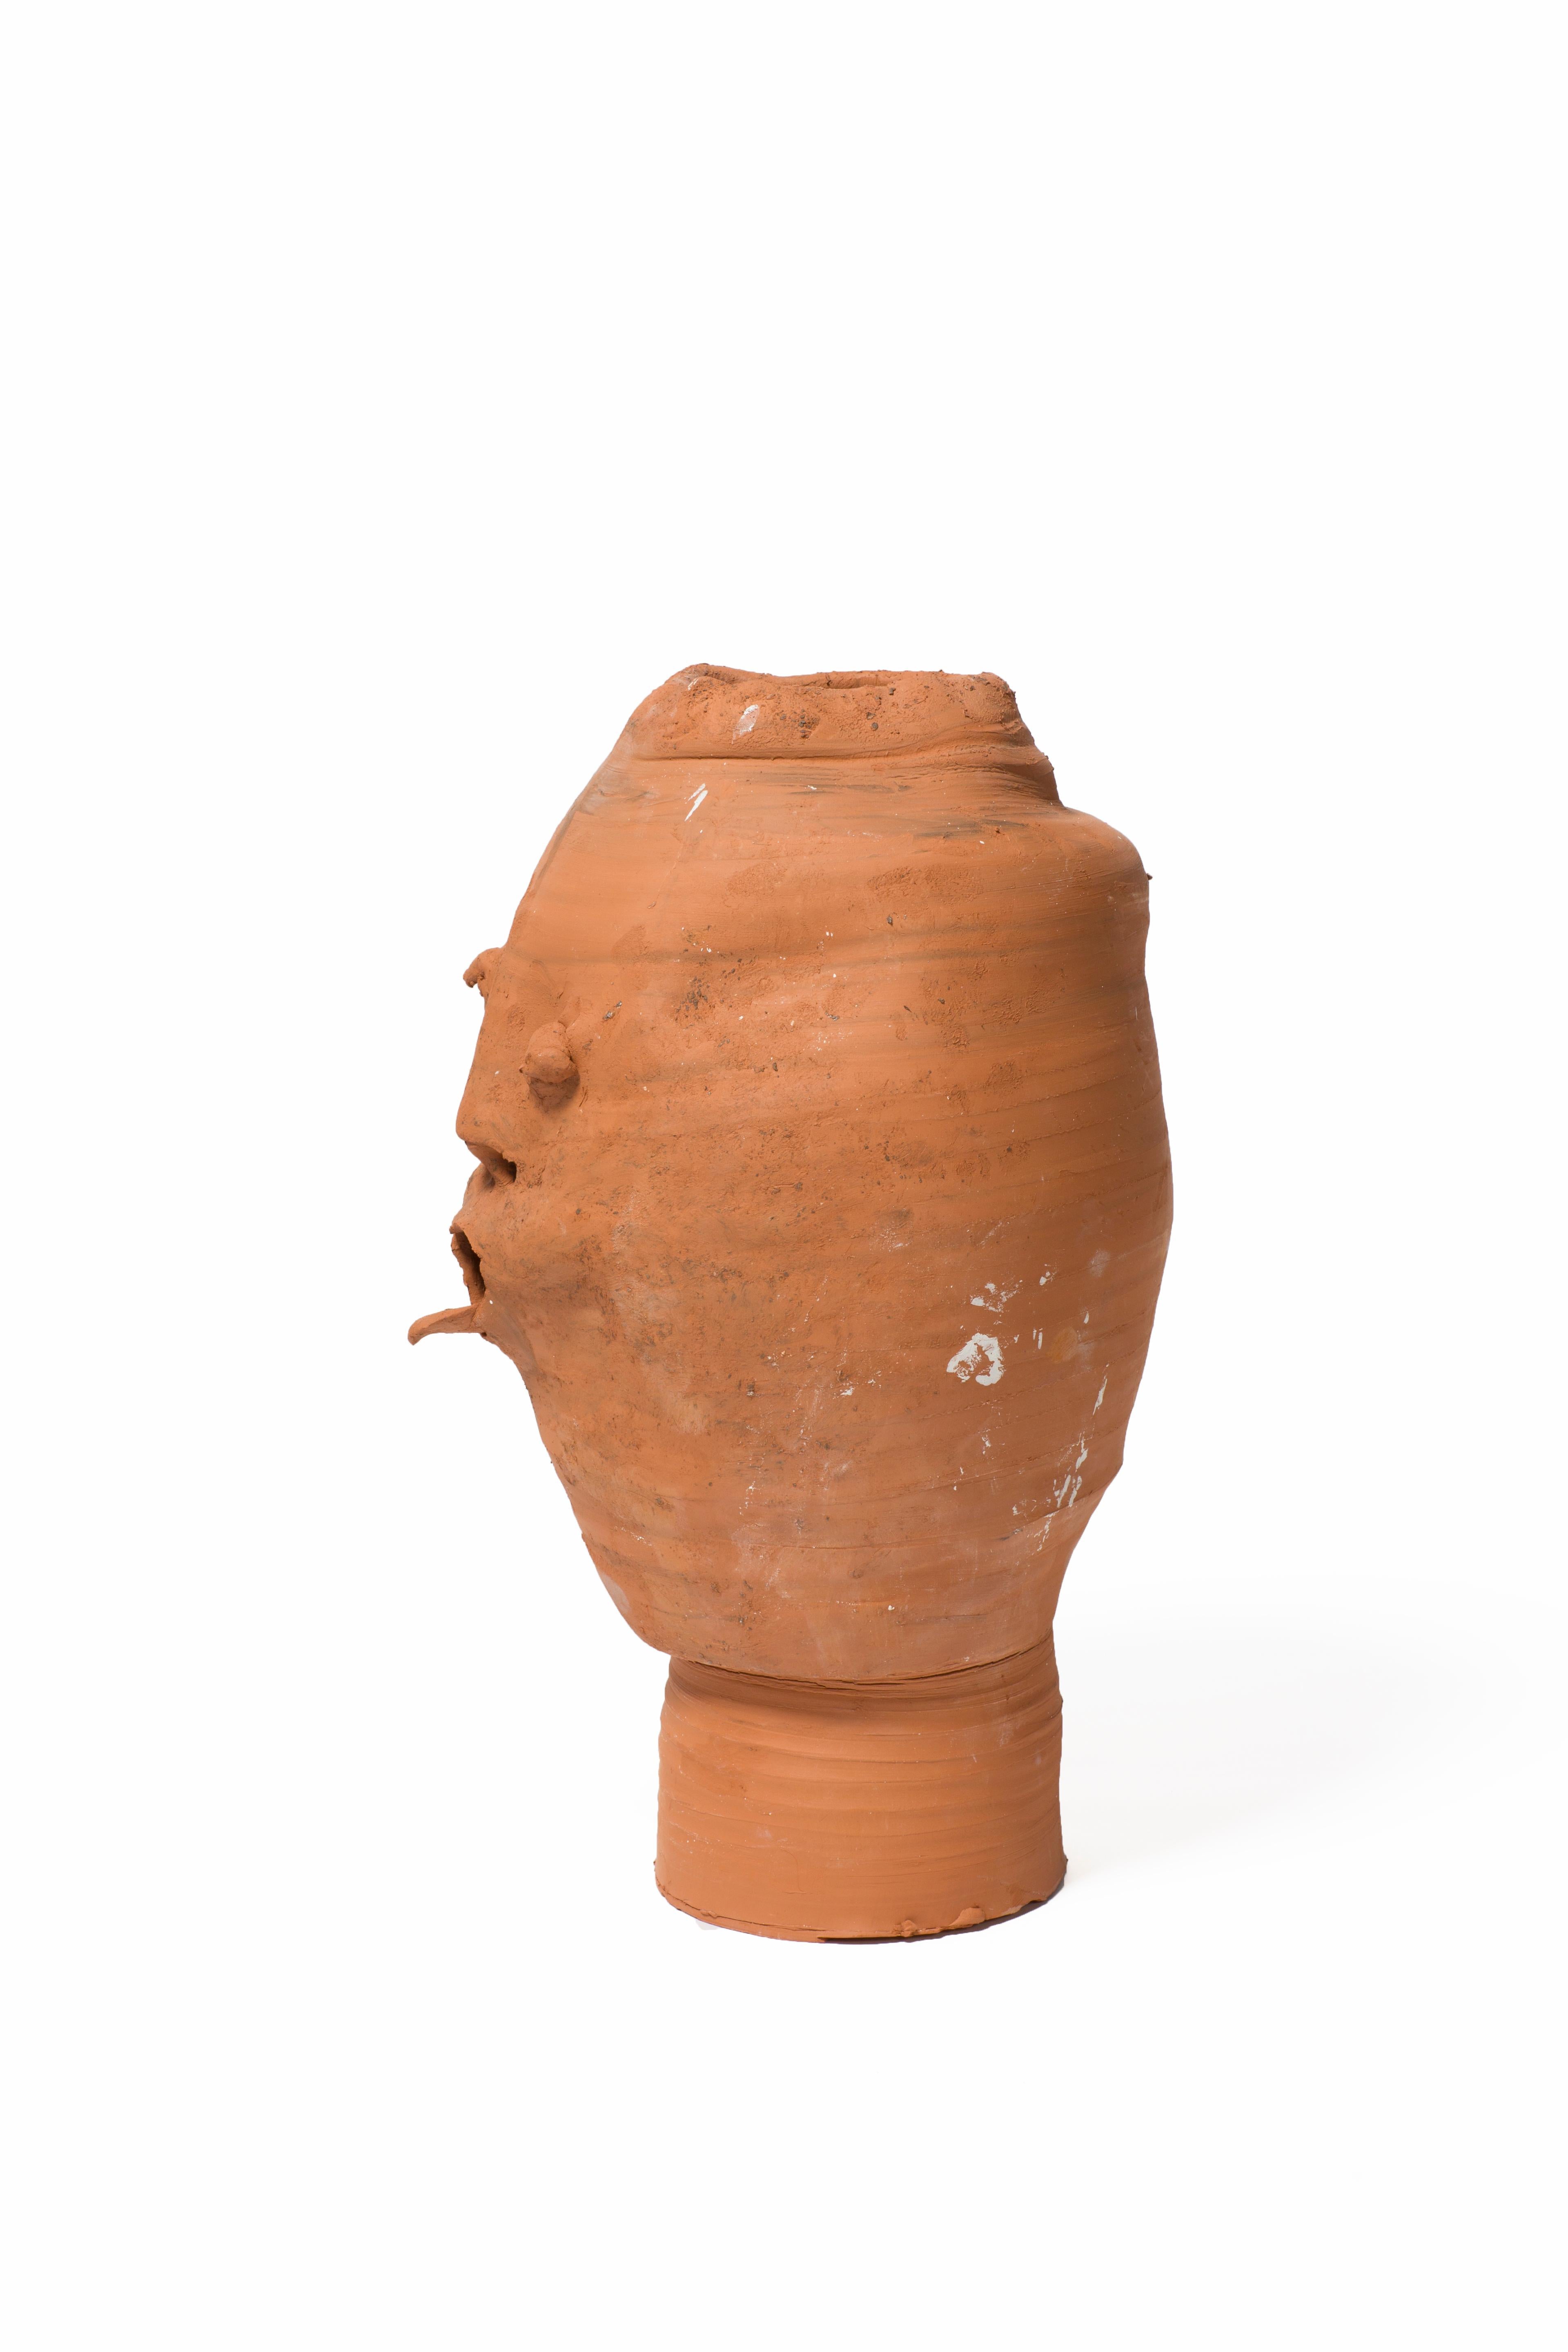 Terracotta head sculpture.
Can be used as a pot for plants and flowers.
Handmade and unique.